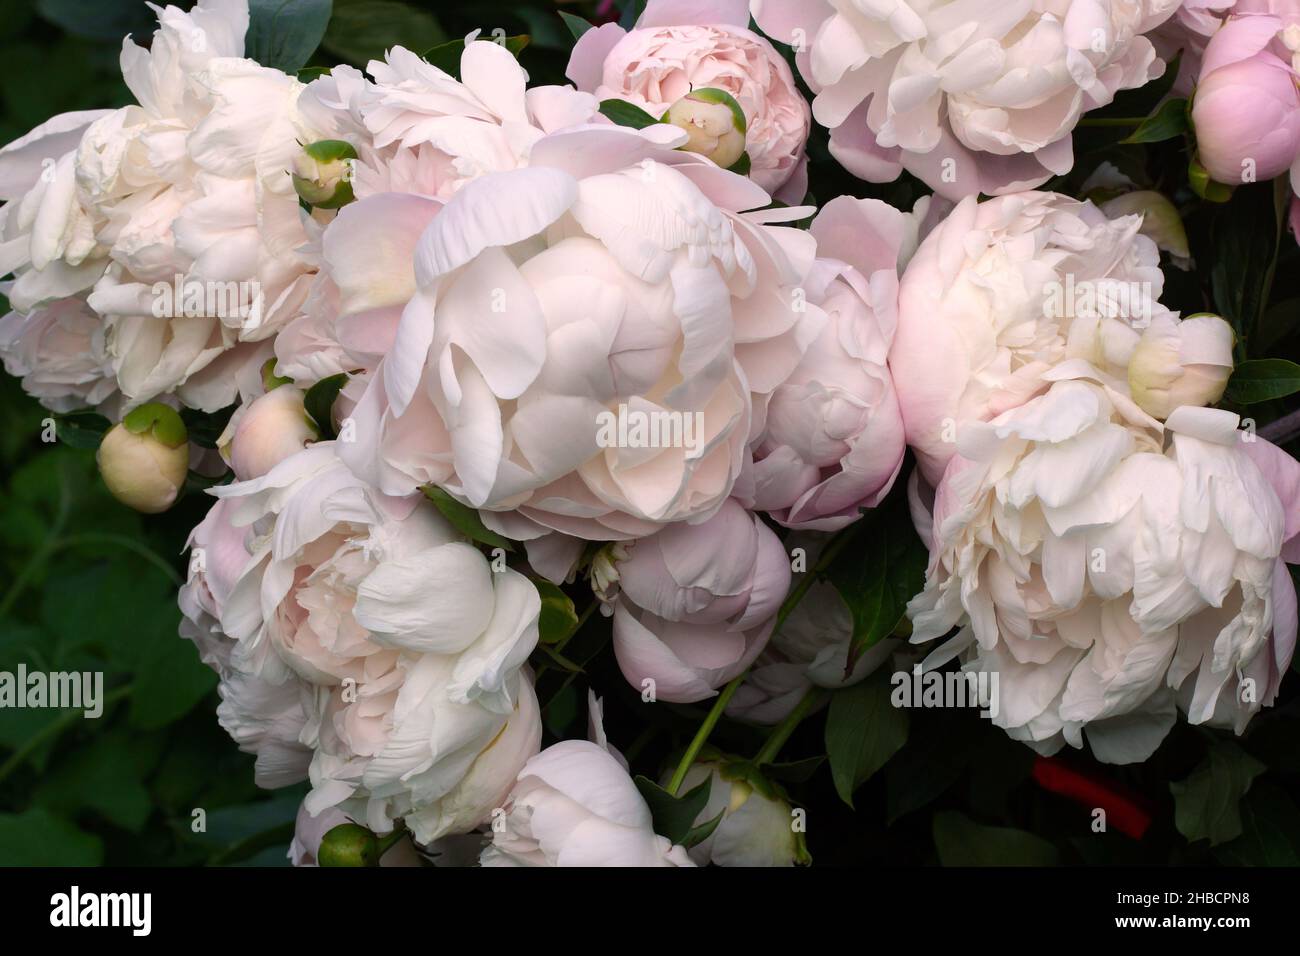 Many beautiful soft pink double peony flowers. Double pink peony 'Mrs. Franklin D. Roosevelt close-up. Stock Photo